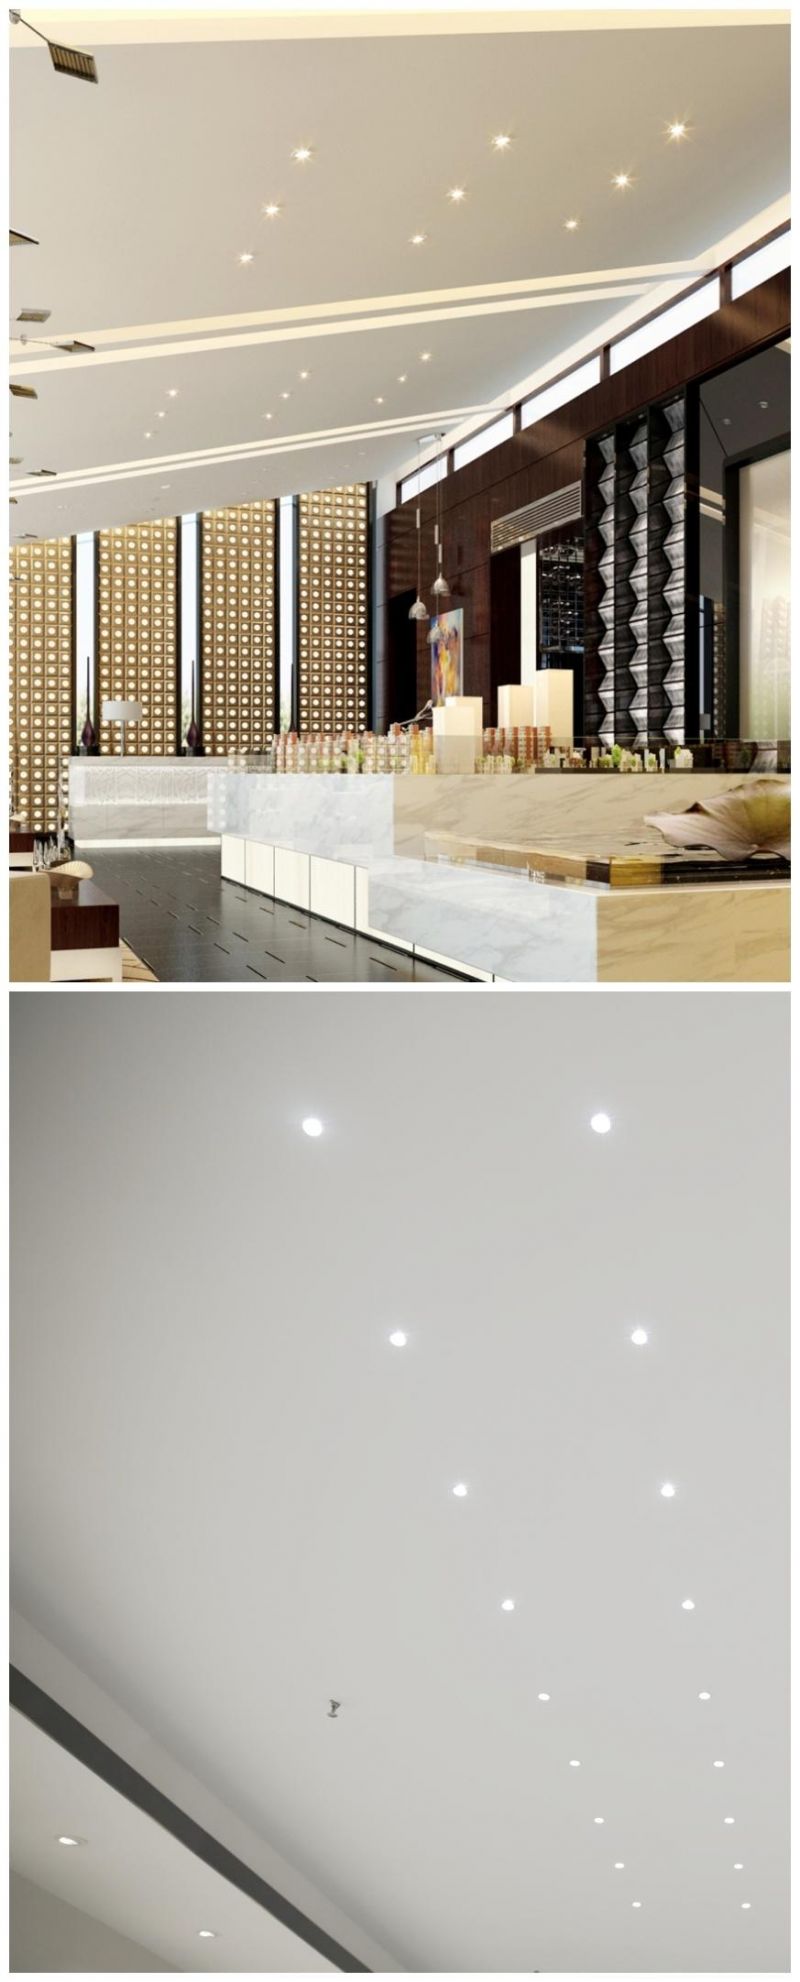 R6853 Small Recessed Down Light Ceiling Light 1W 3W Interior Lighting Fixture LED Lamp